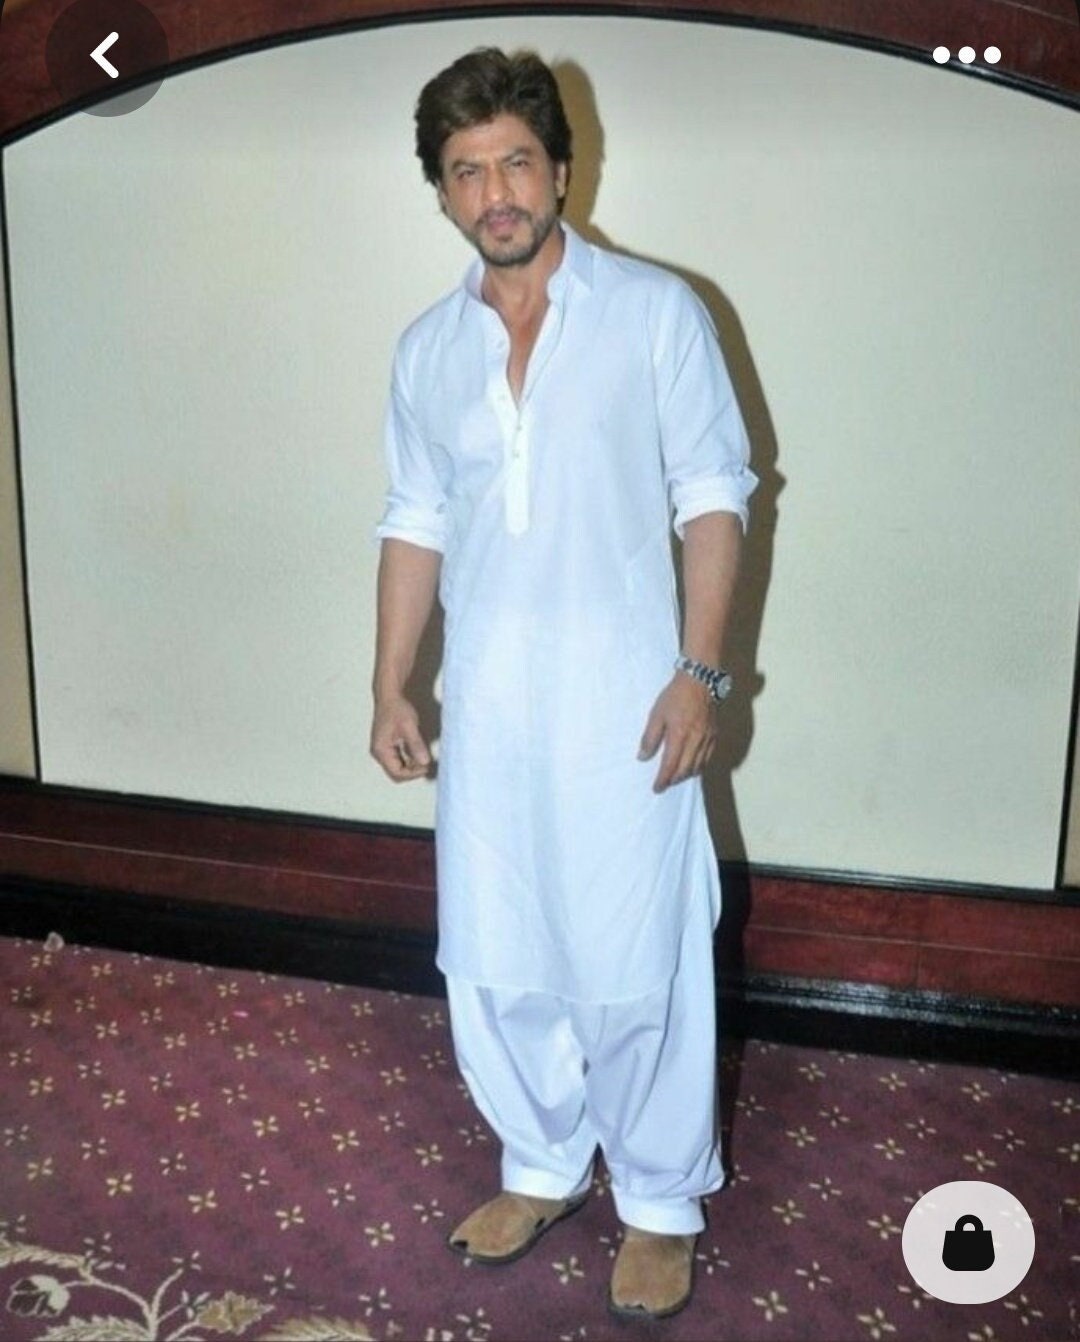 Shah Rukh Khan makes stylish entry at Dance Plus 5 in white pathani suit  (See Pics)